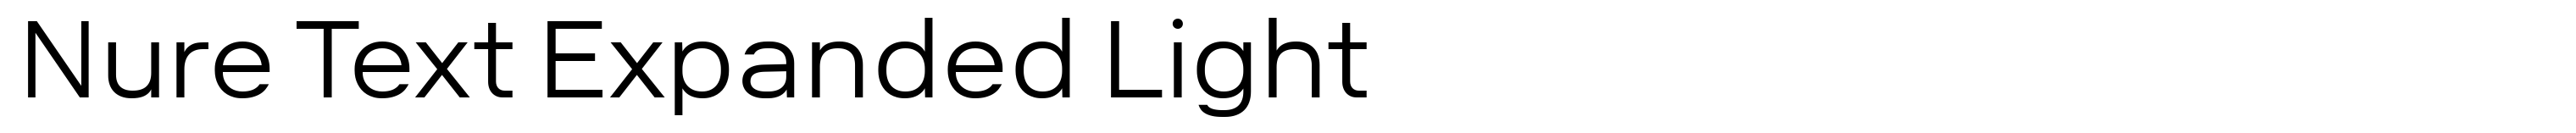 Nure Text Expanded Light